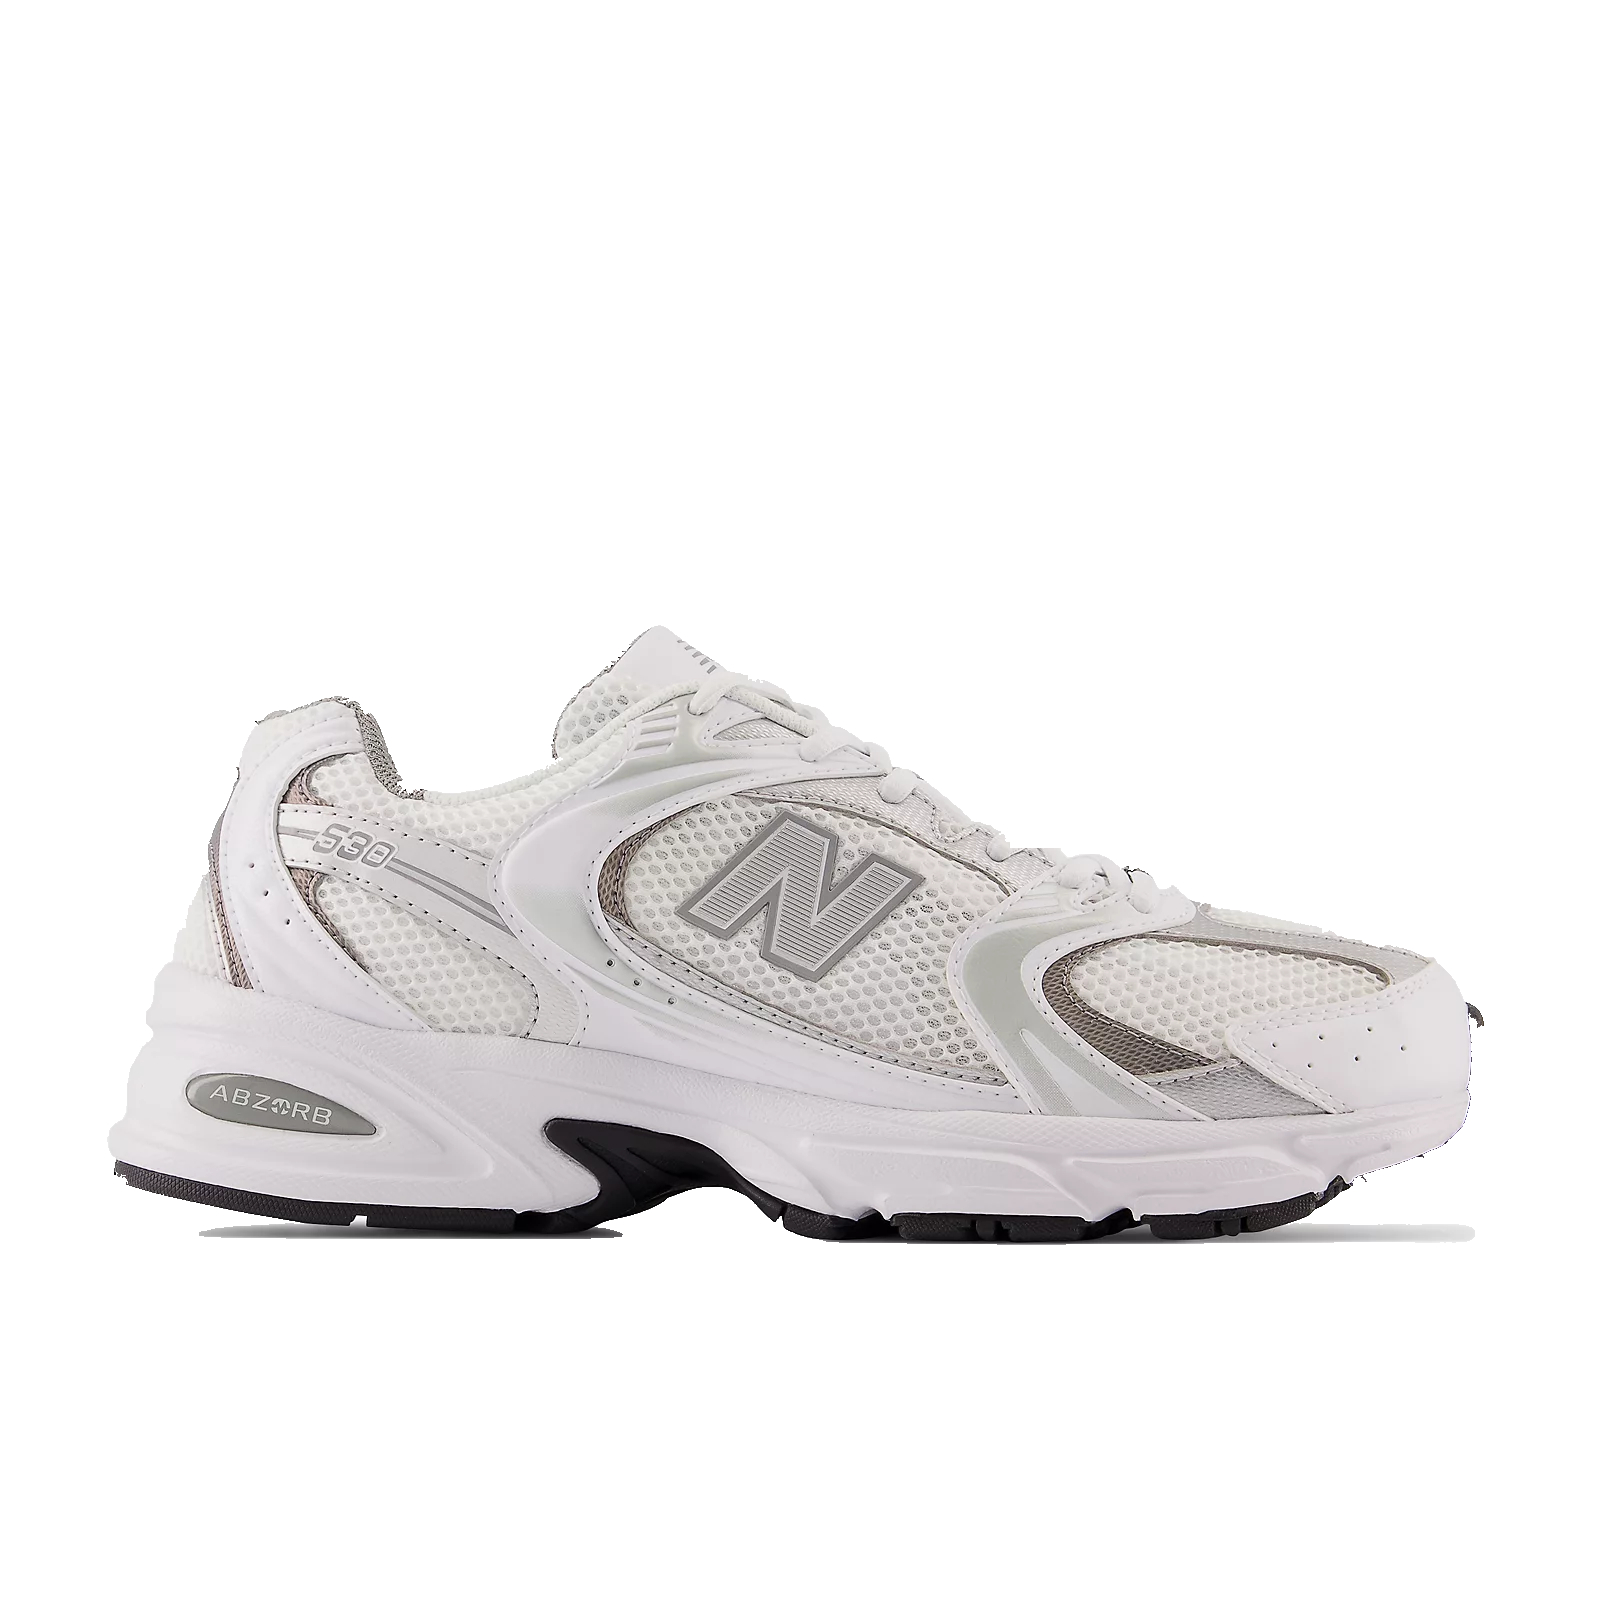 New balance 530 sneakers dames